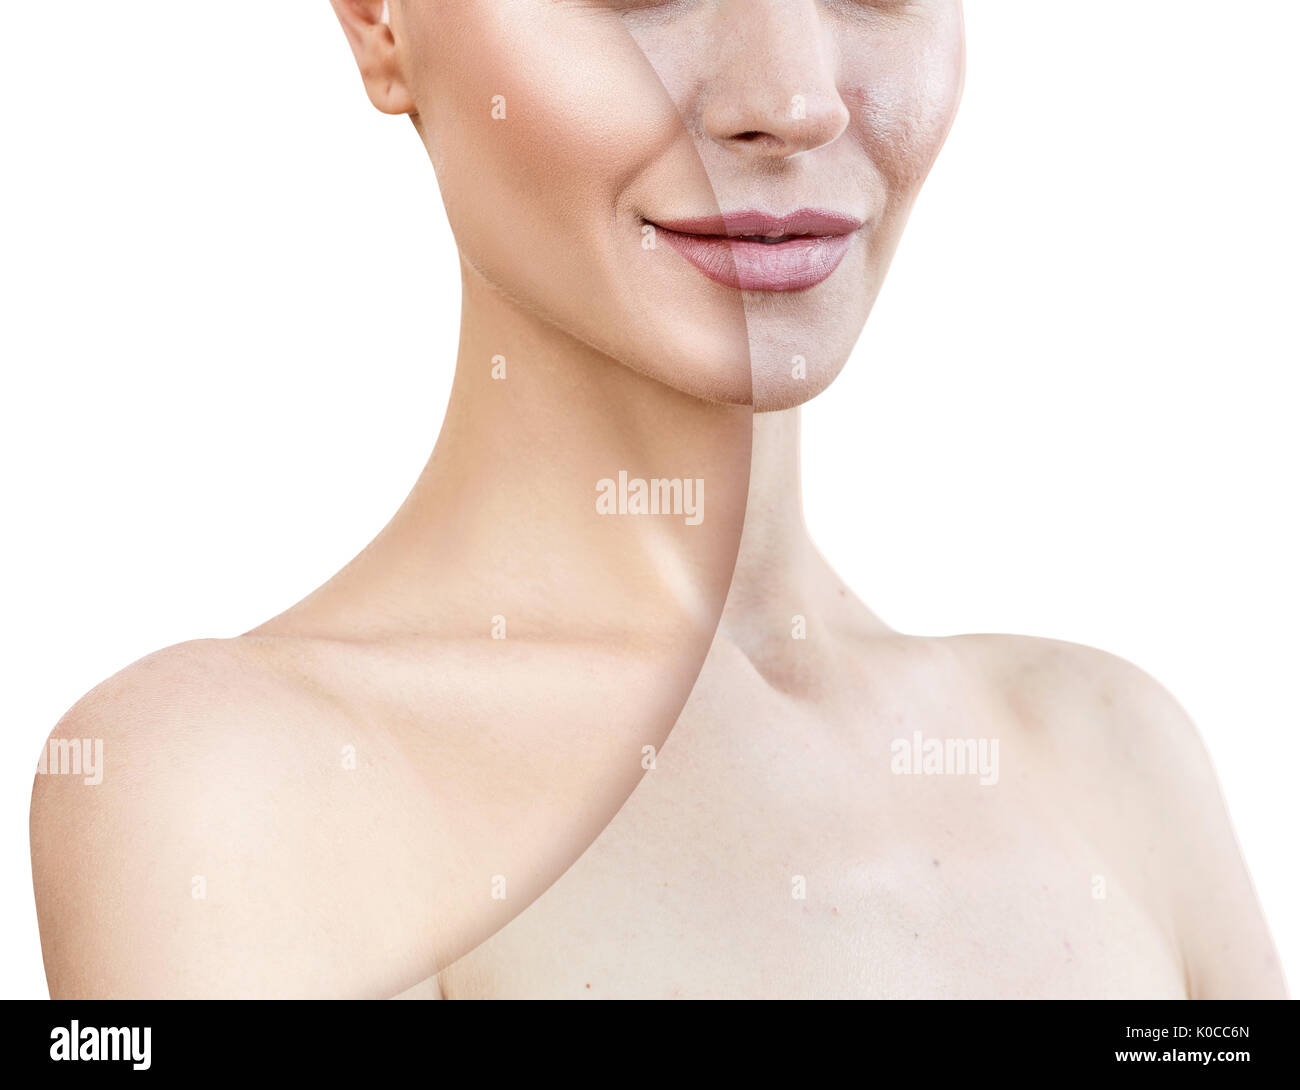 young woman before and after retouch Stock Photo